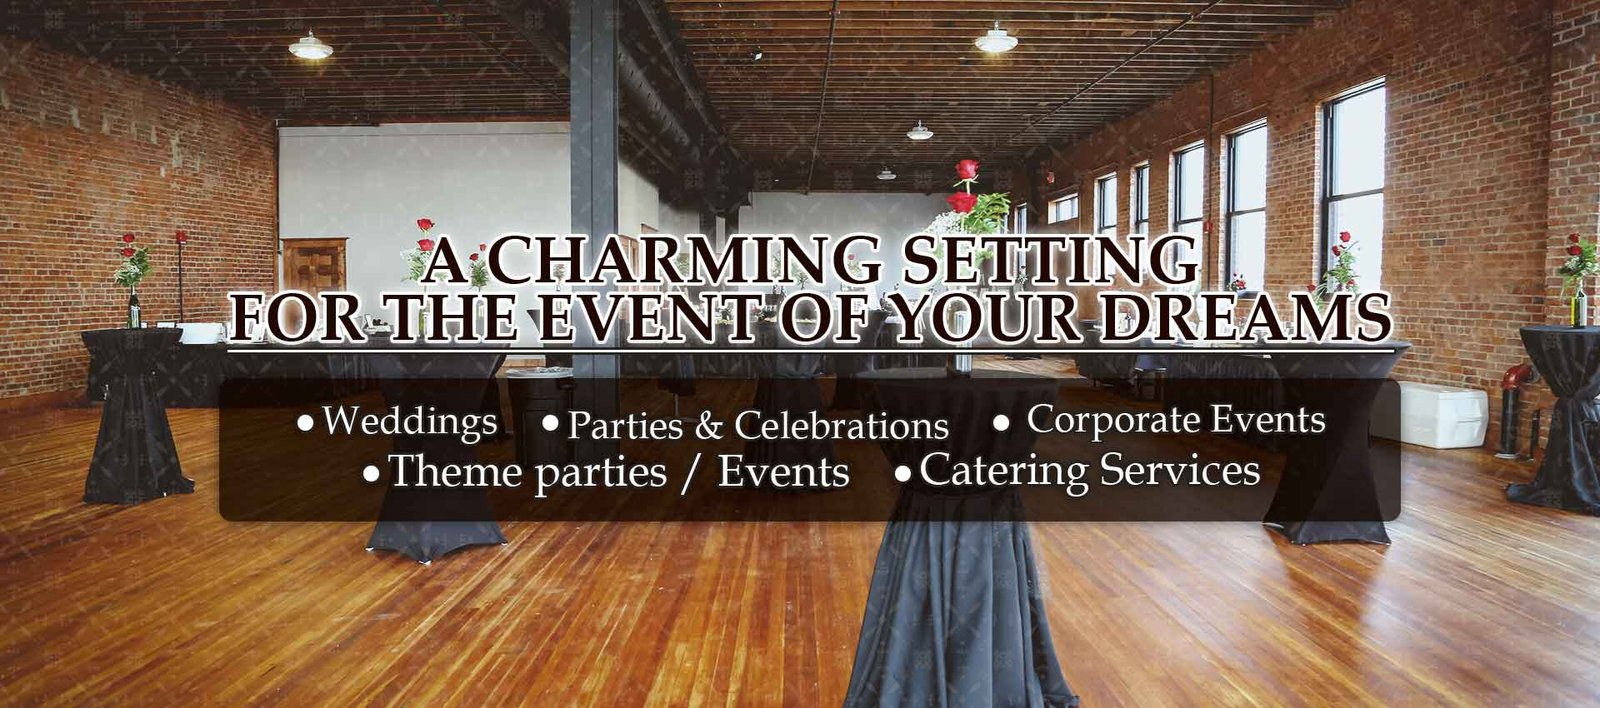 Event Venues for Birthdays in Lancaster County